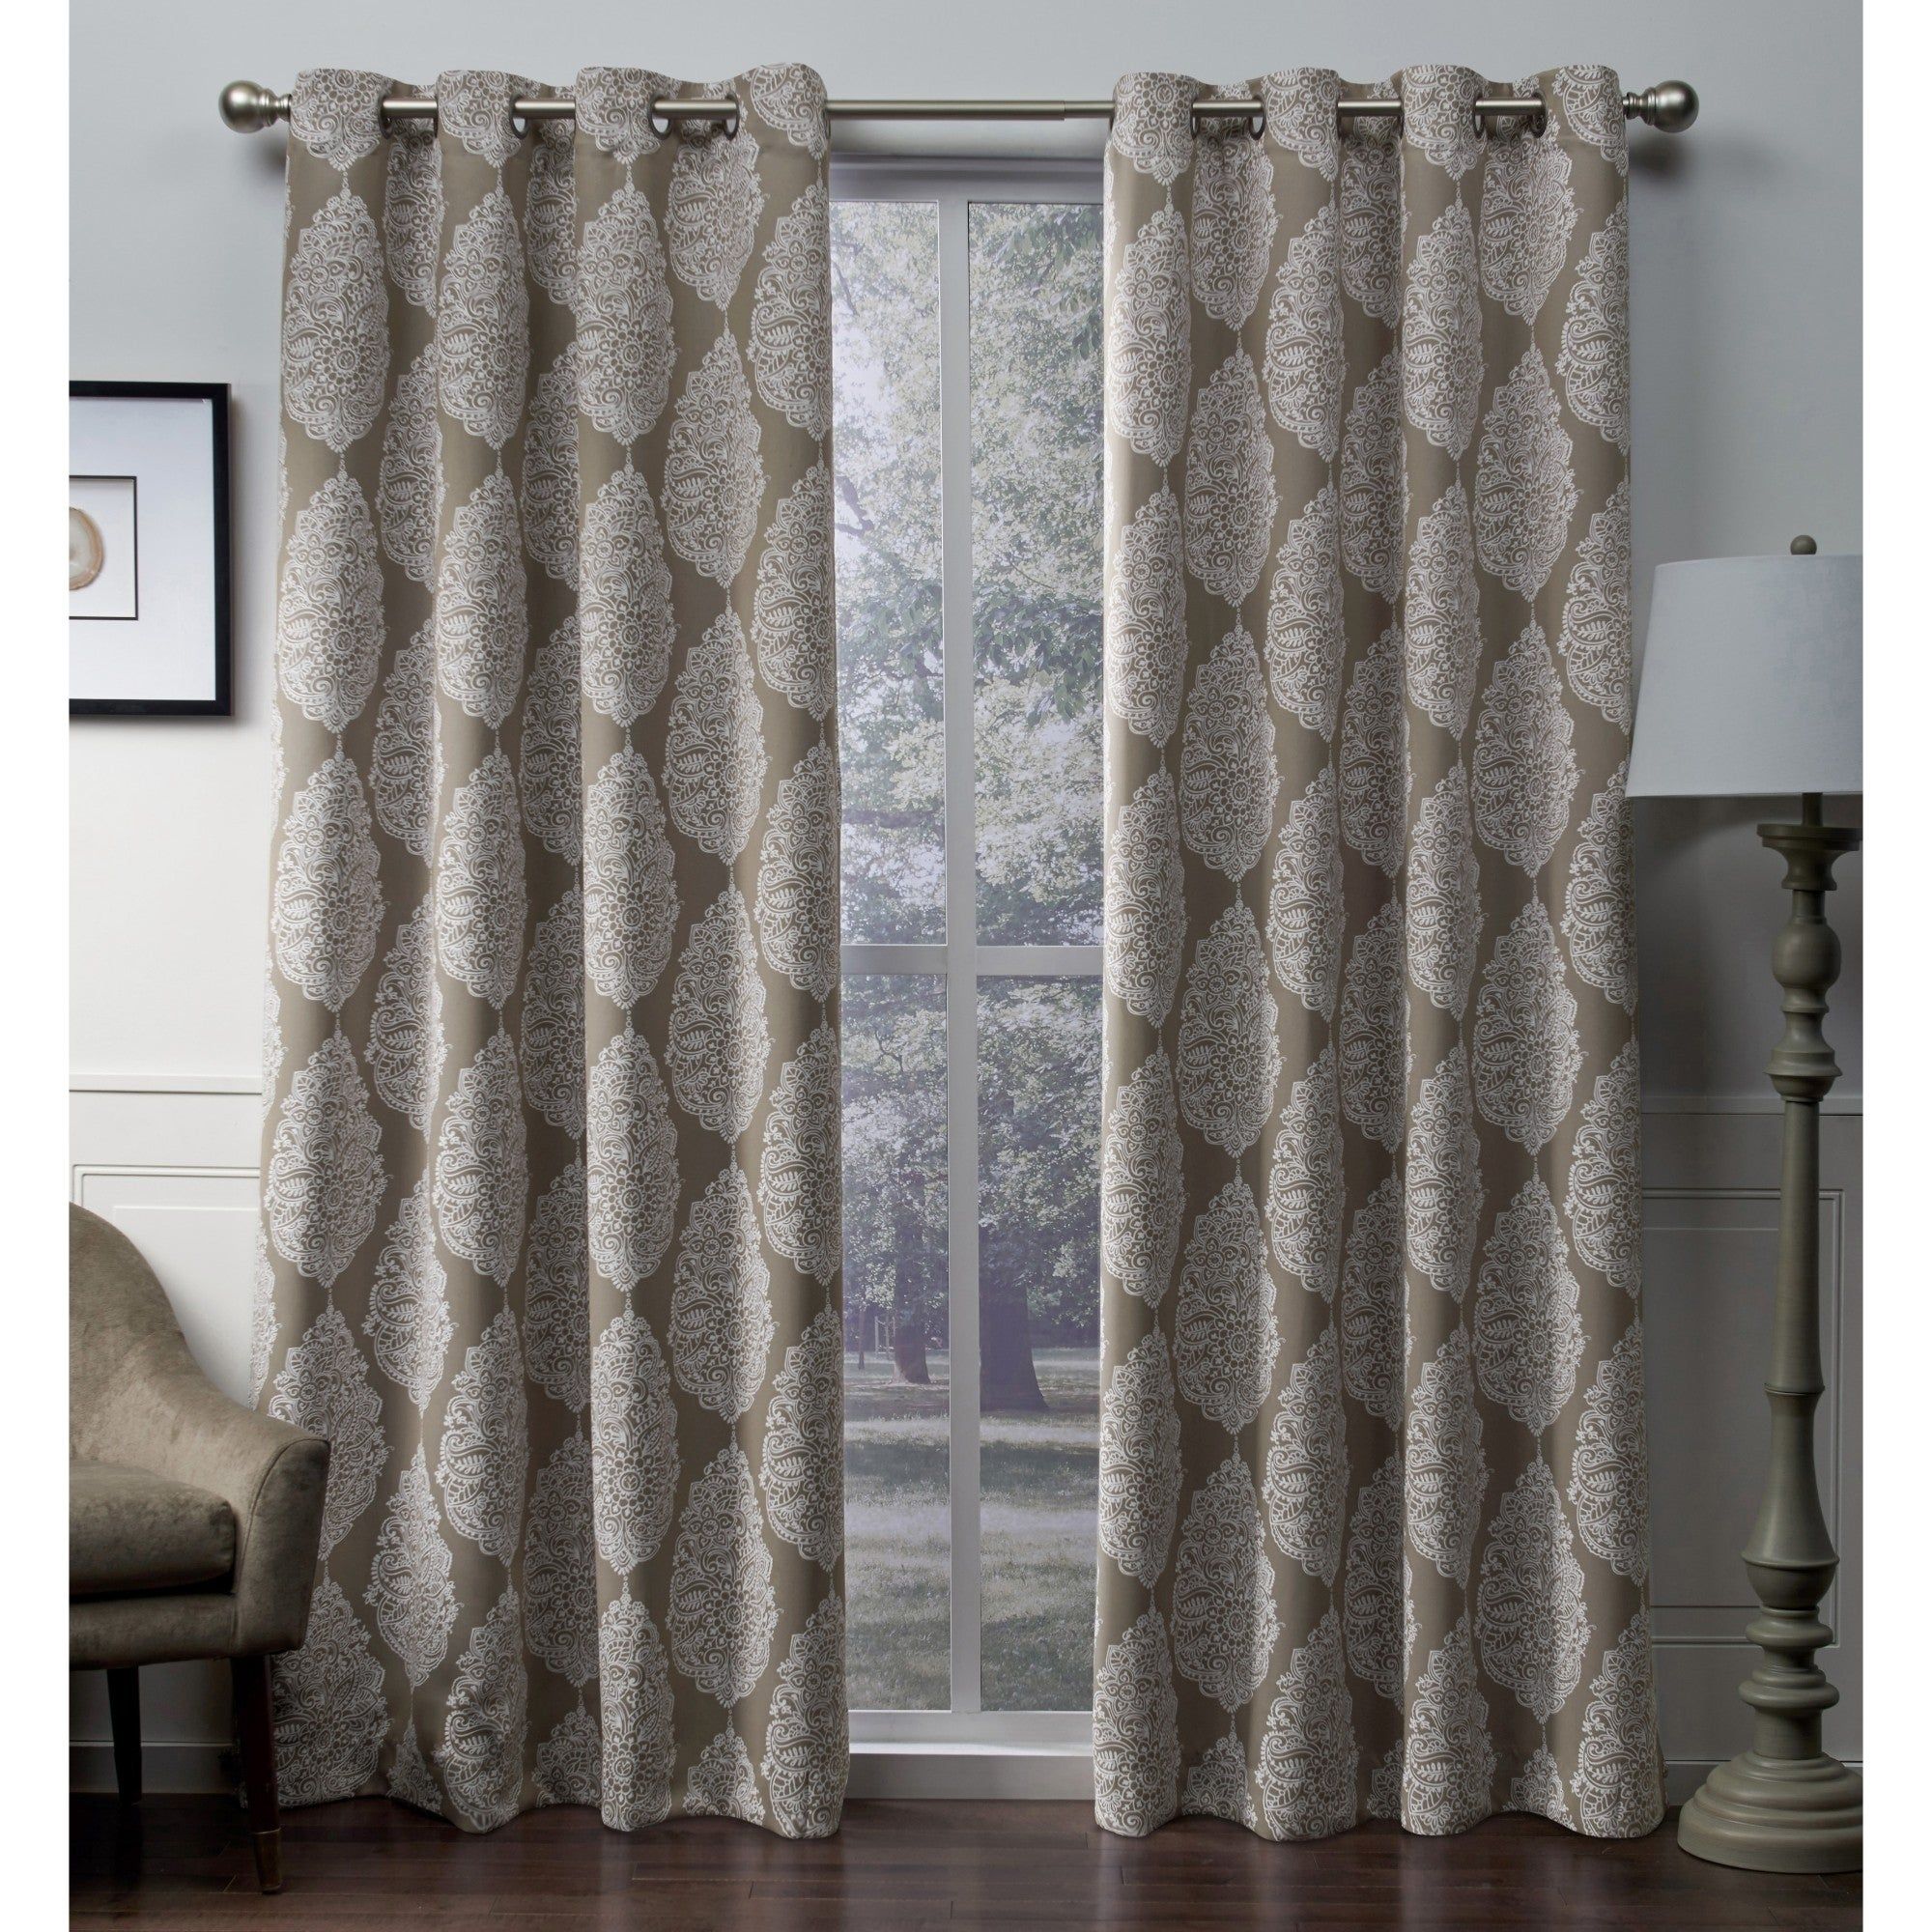 Ati Home Queensland Sateen Blackout Grommet Top Curtain Panel Pair Intended For The Curated Nomad Duane Blackout Curtain Panel Pairs (View 27 of 30)